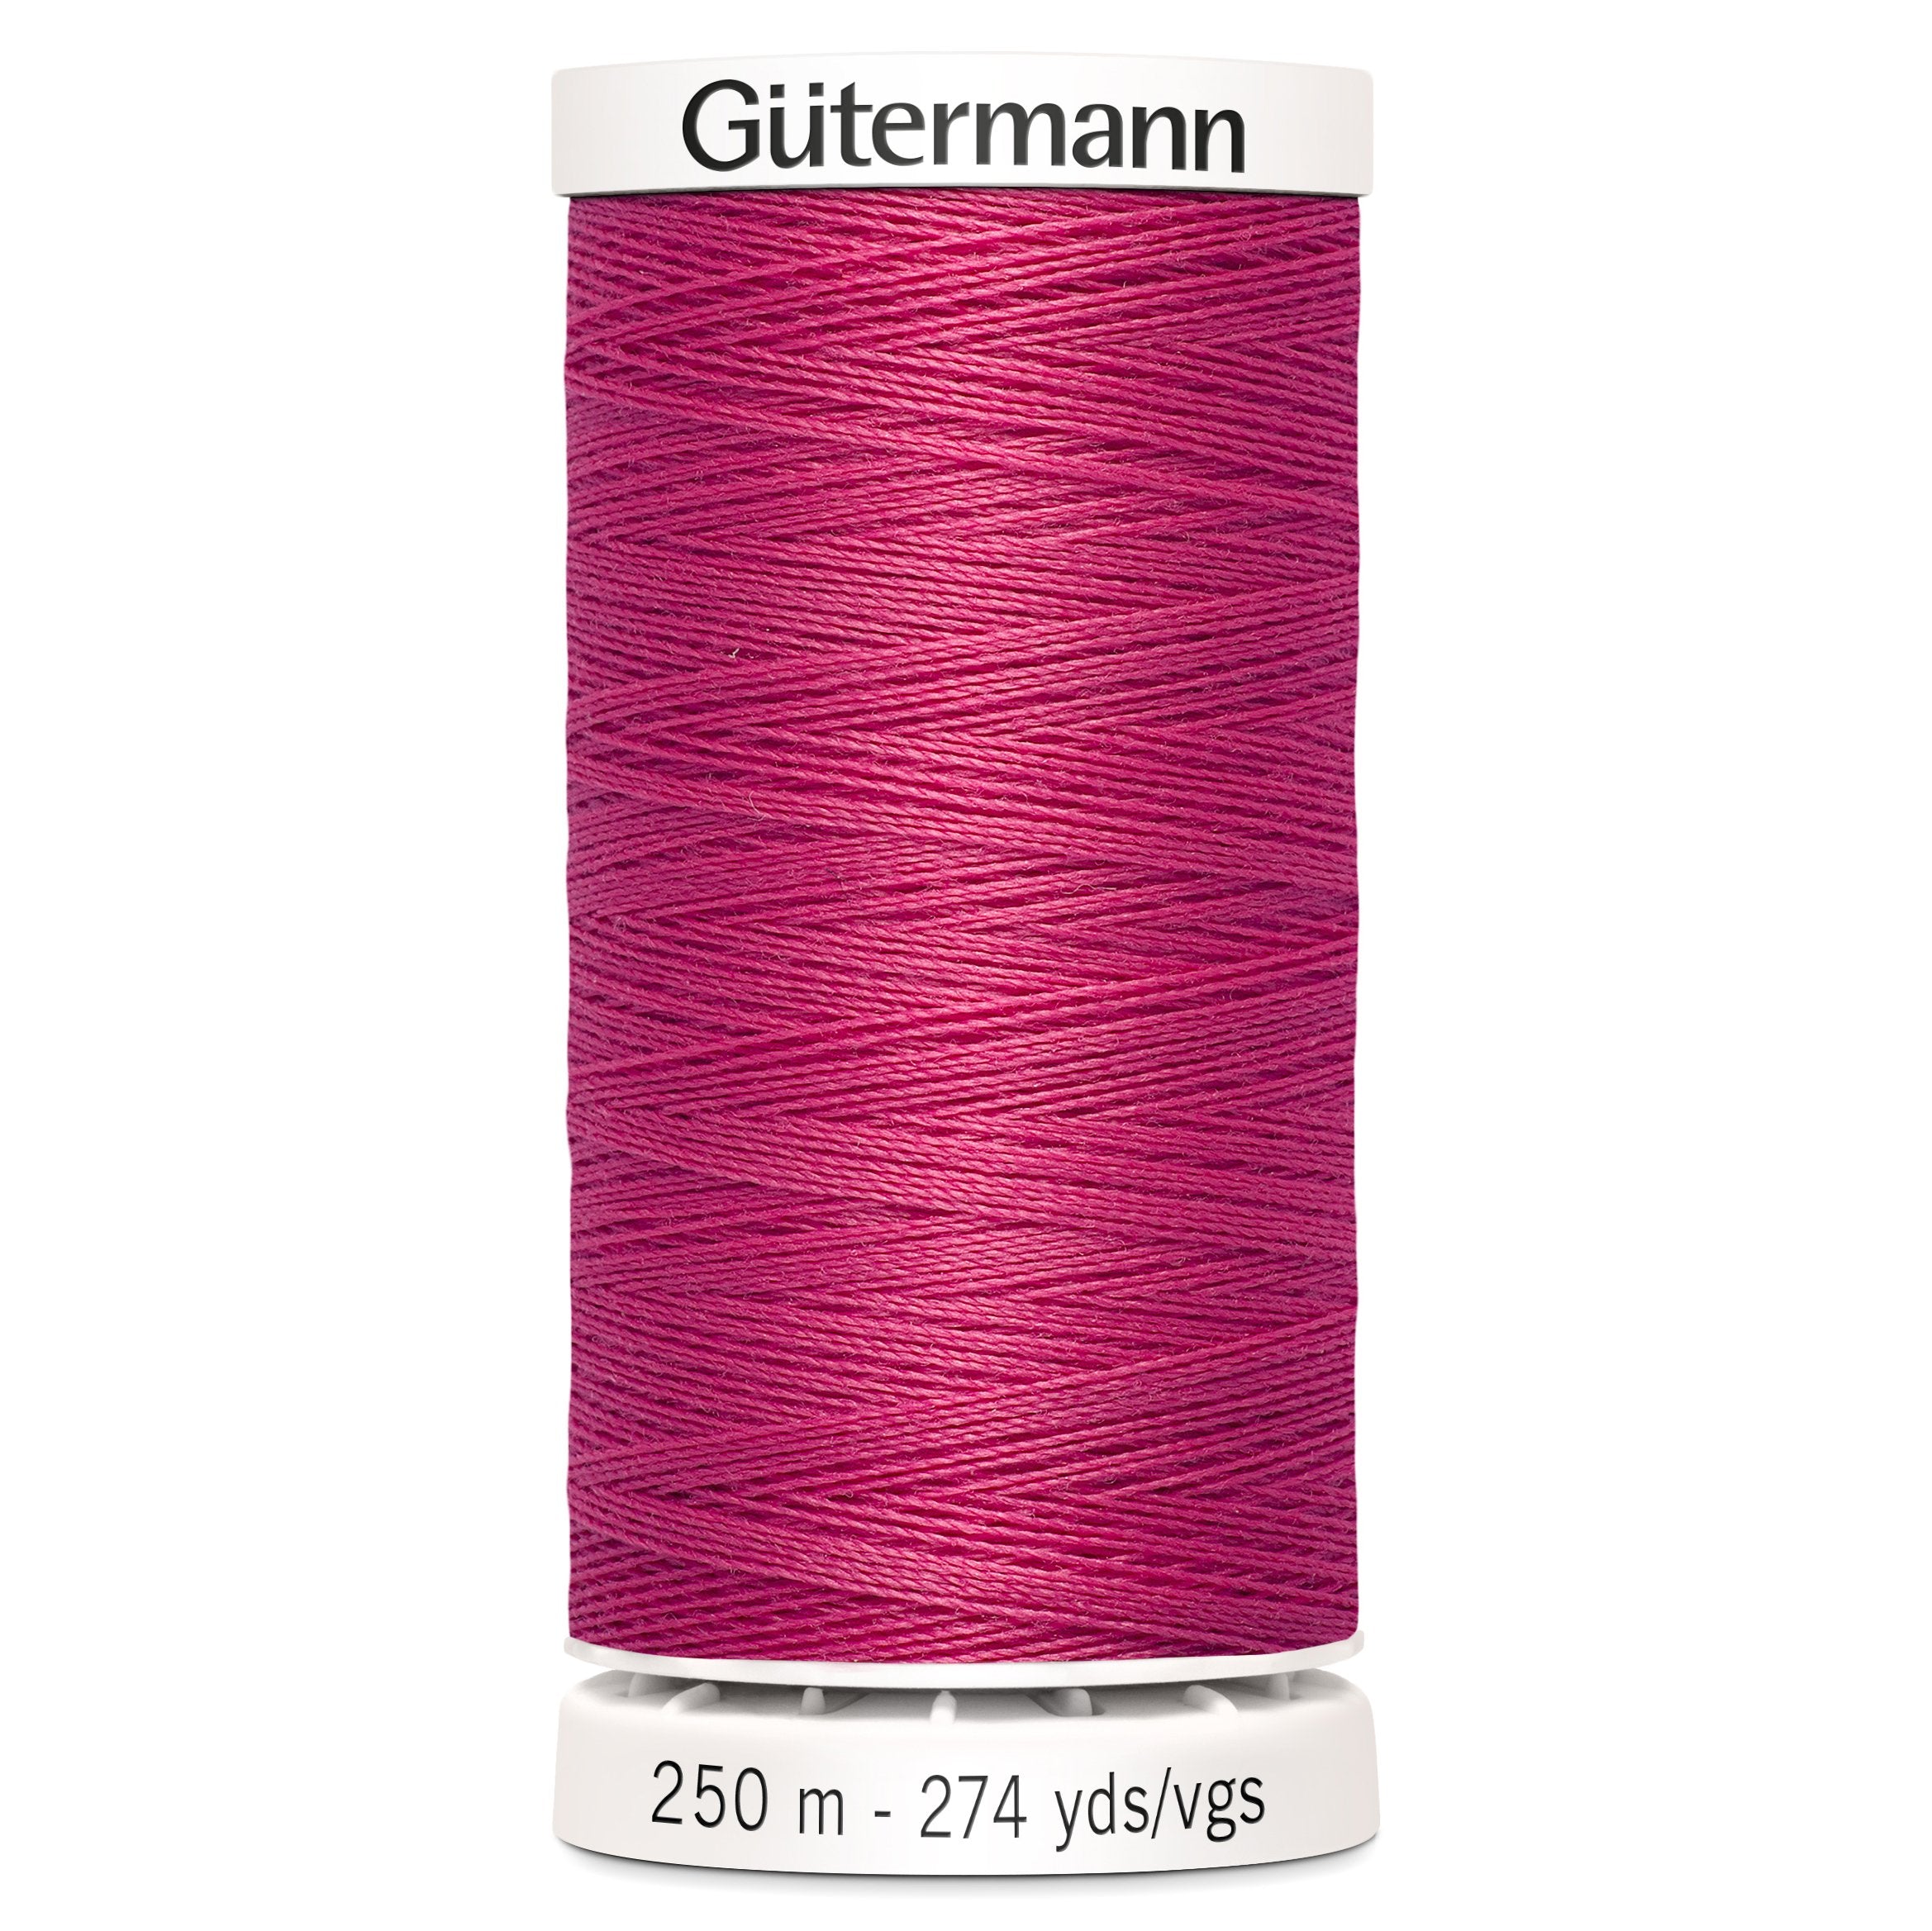 Guterman Sew-All Sewing Thread | 890 Pink from Jaycotts Sewing Supplies